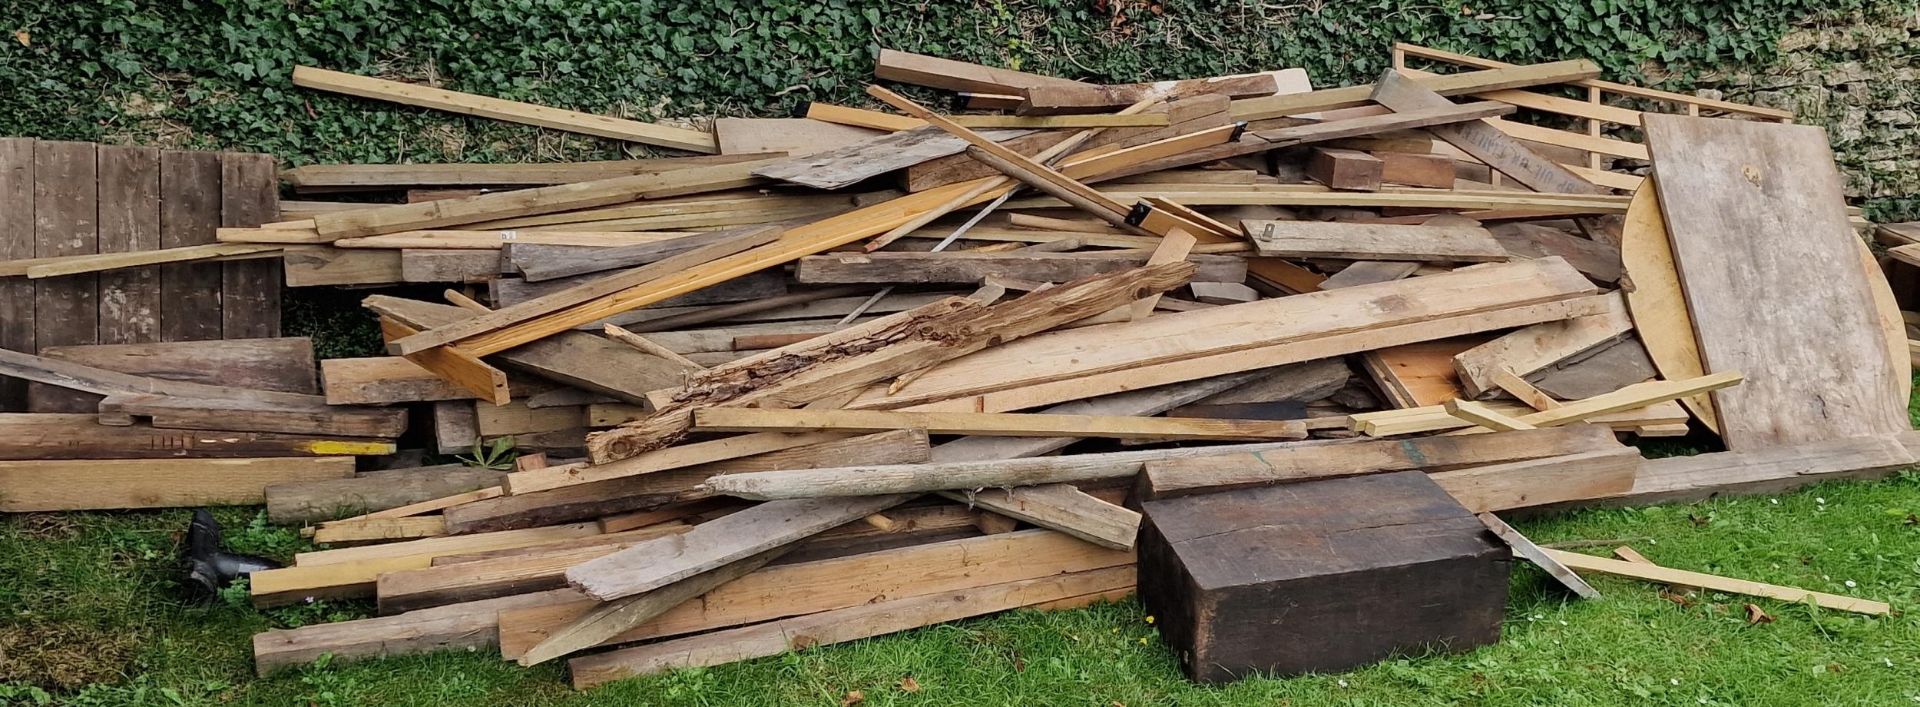 Large wood pile of various timbers